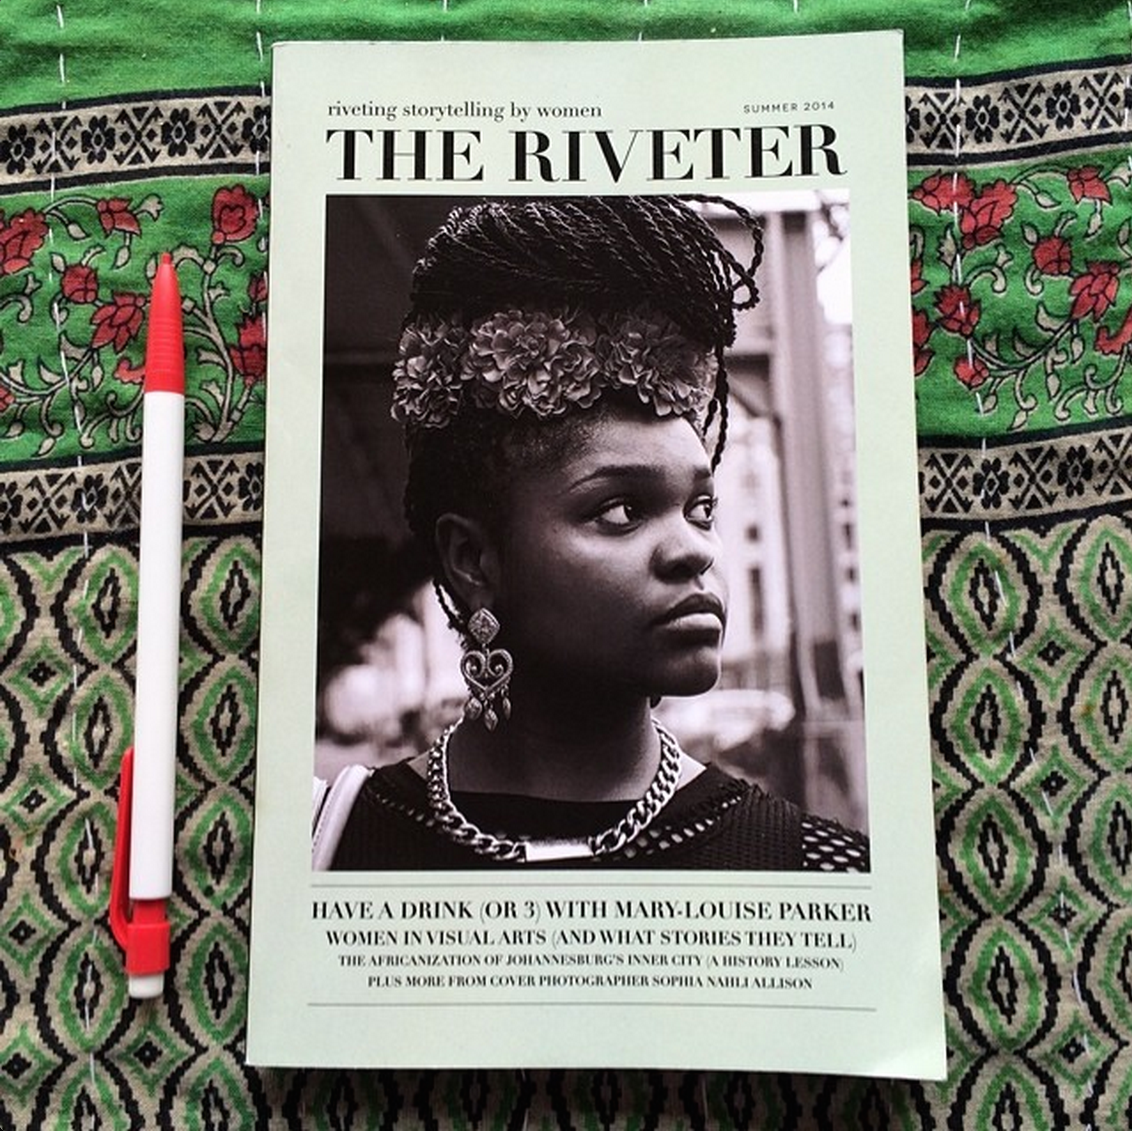 The Riveter's second issue was published in summer 2014, and its third issue is set to publish this fall. 